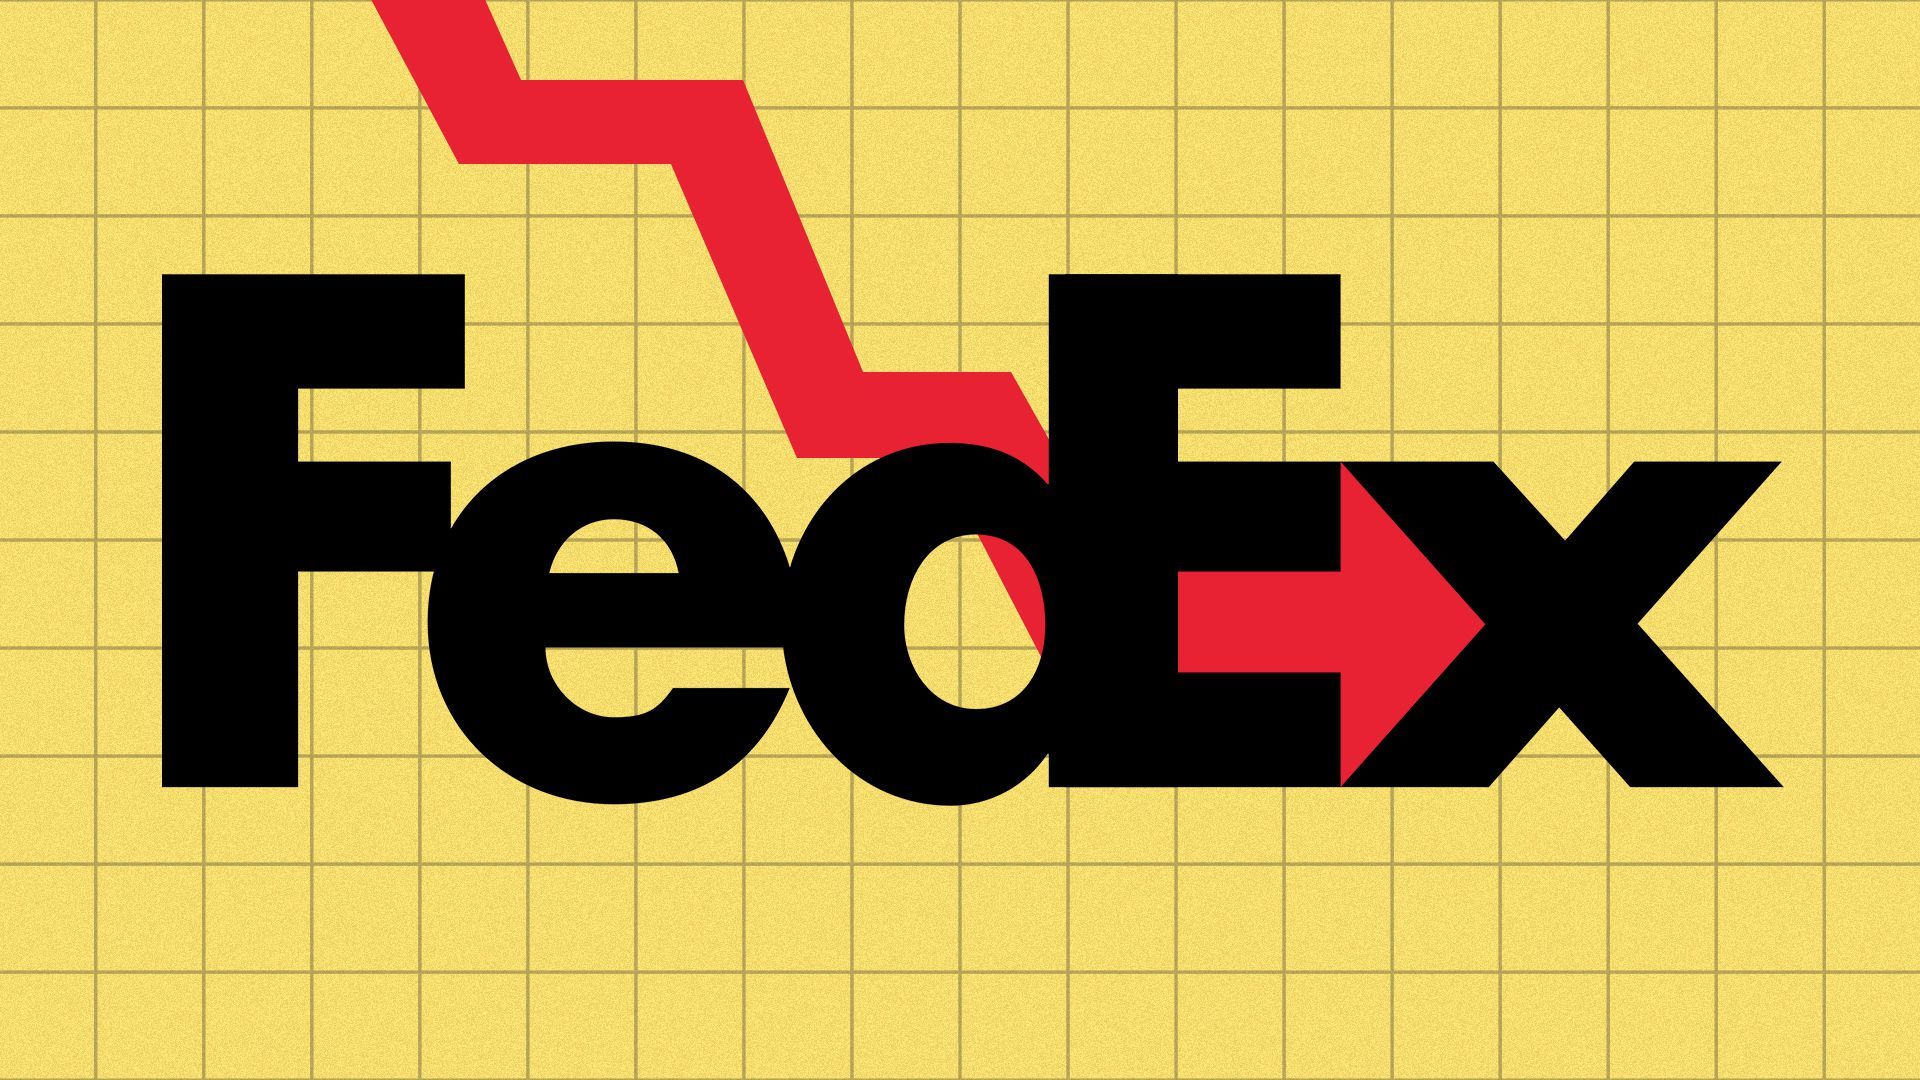 Illustration of the FedEx logo with a downward arrow as the arrow in the logo. 